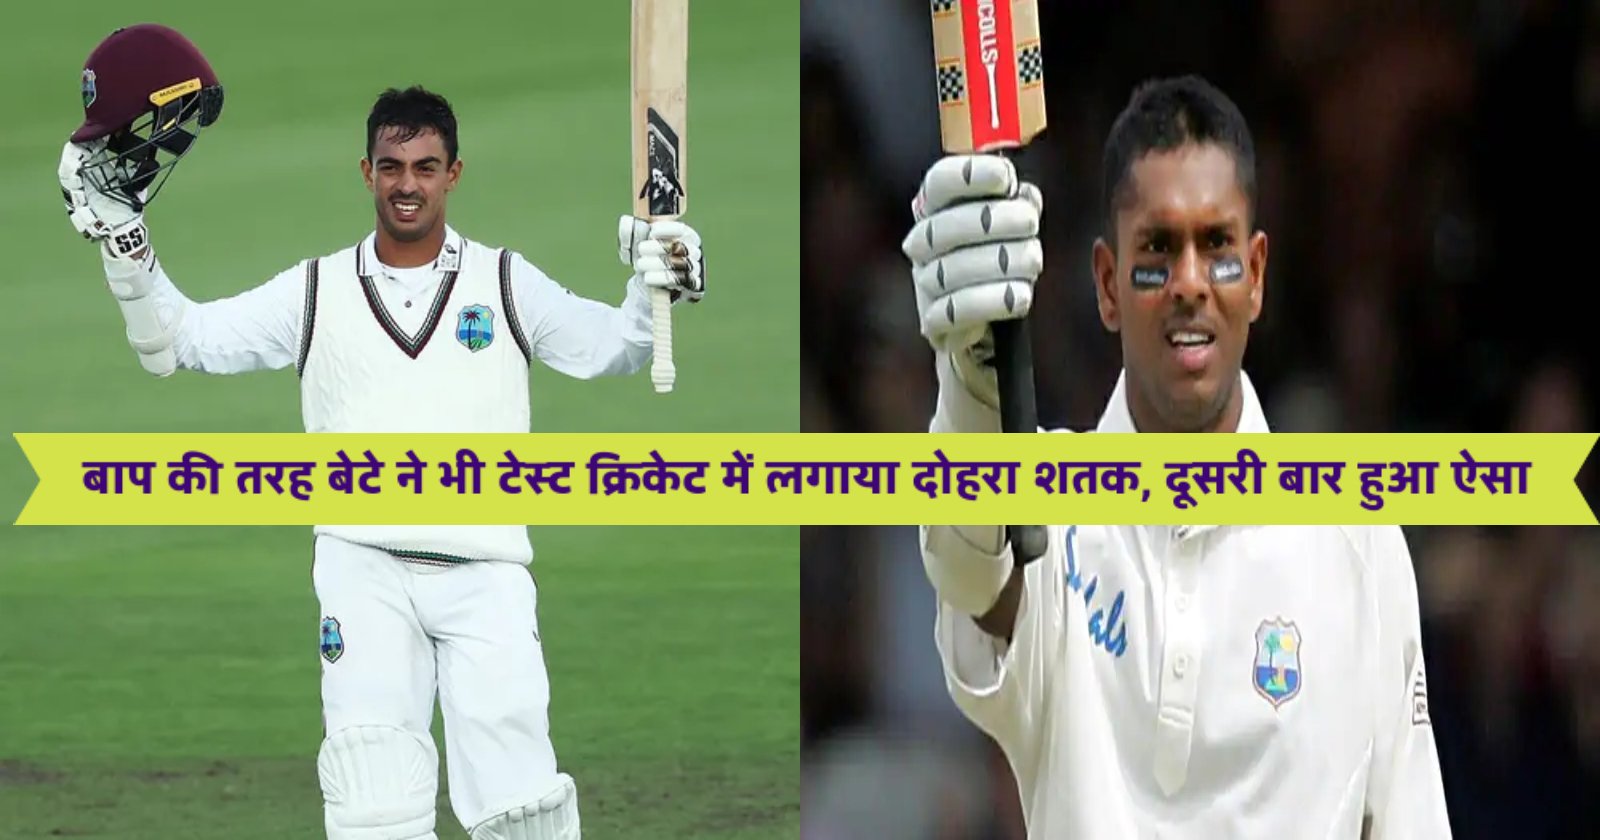 1675697845son and father pair to hit test cricket century and double Century in Hindi test cricket records.jpg